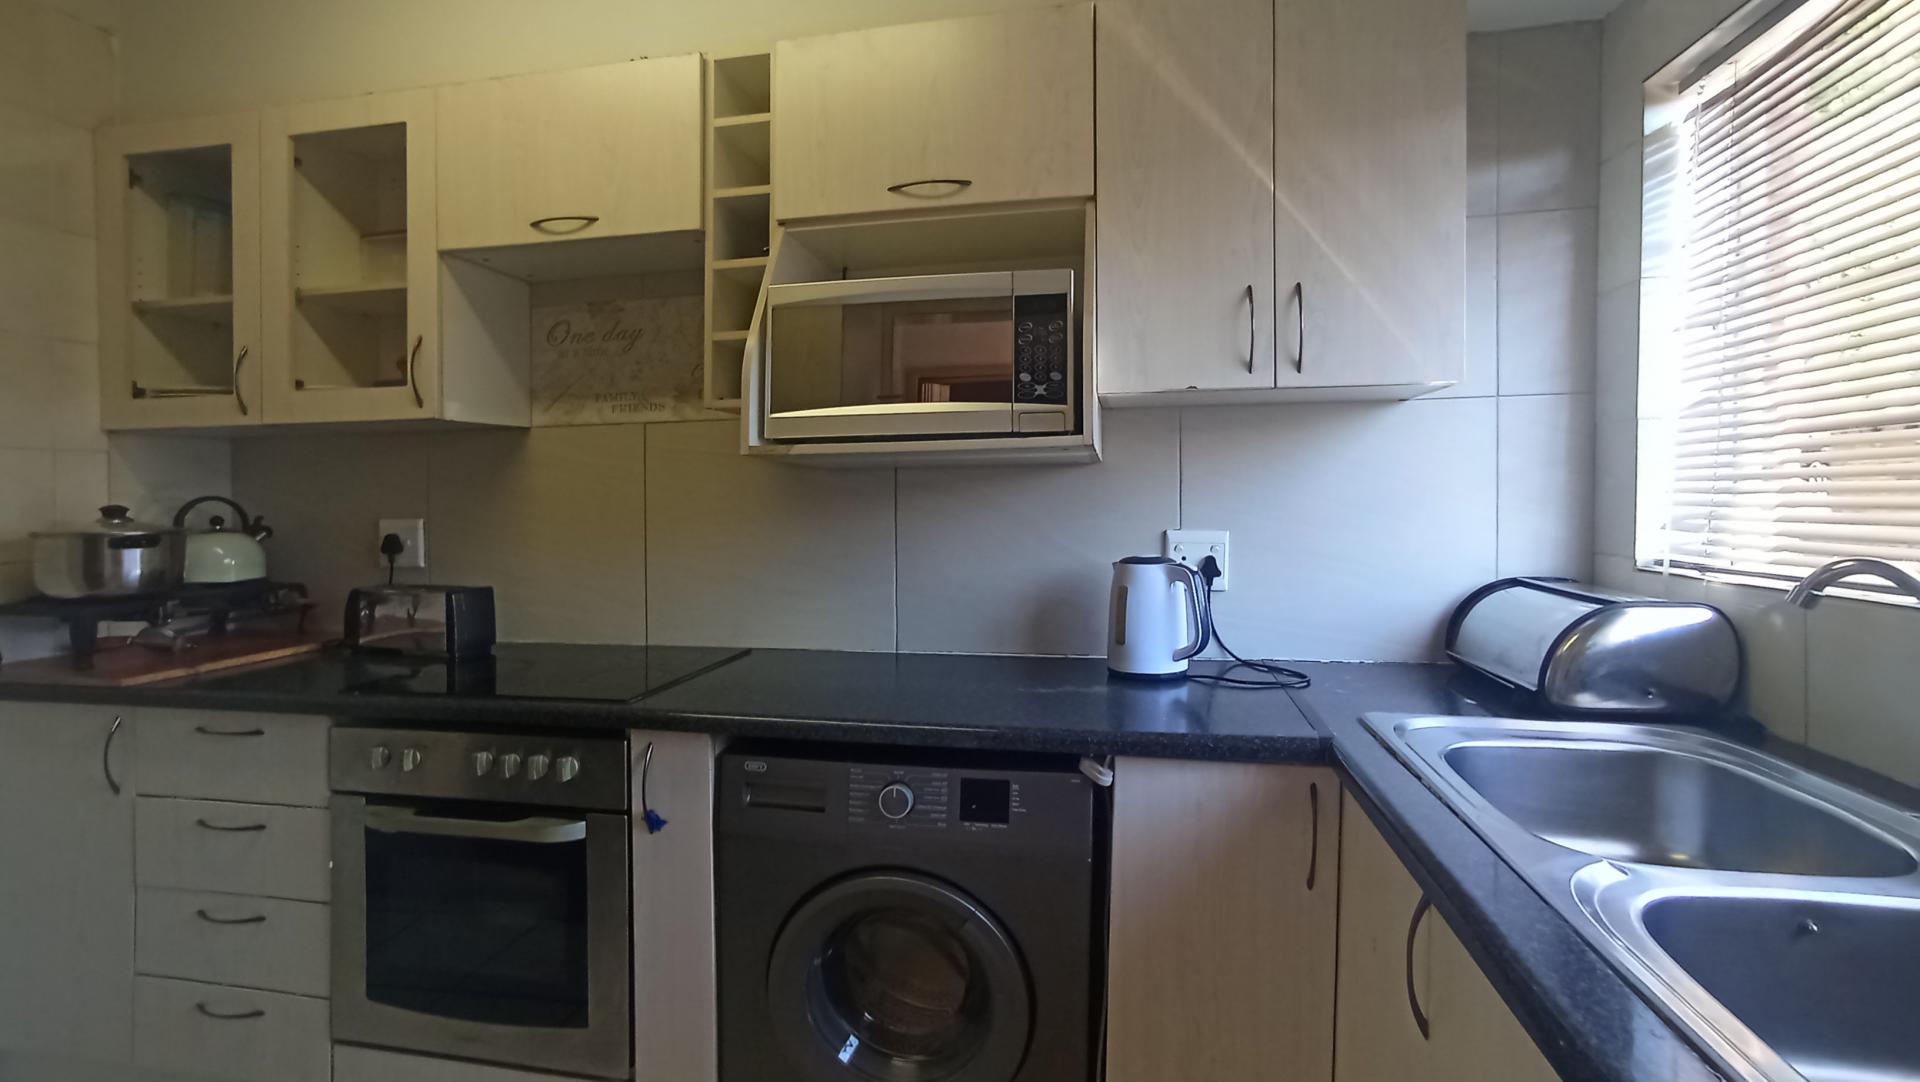 Kitchen - 7 square meters of property in Fontainebleau